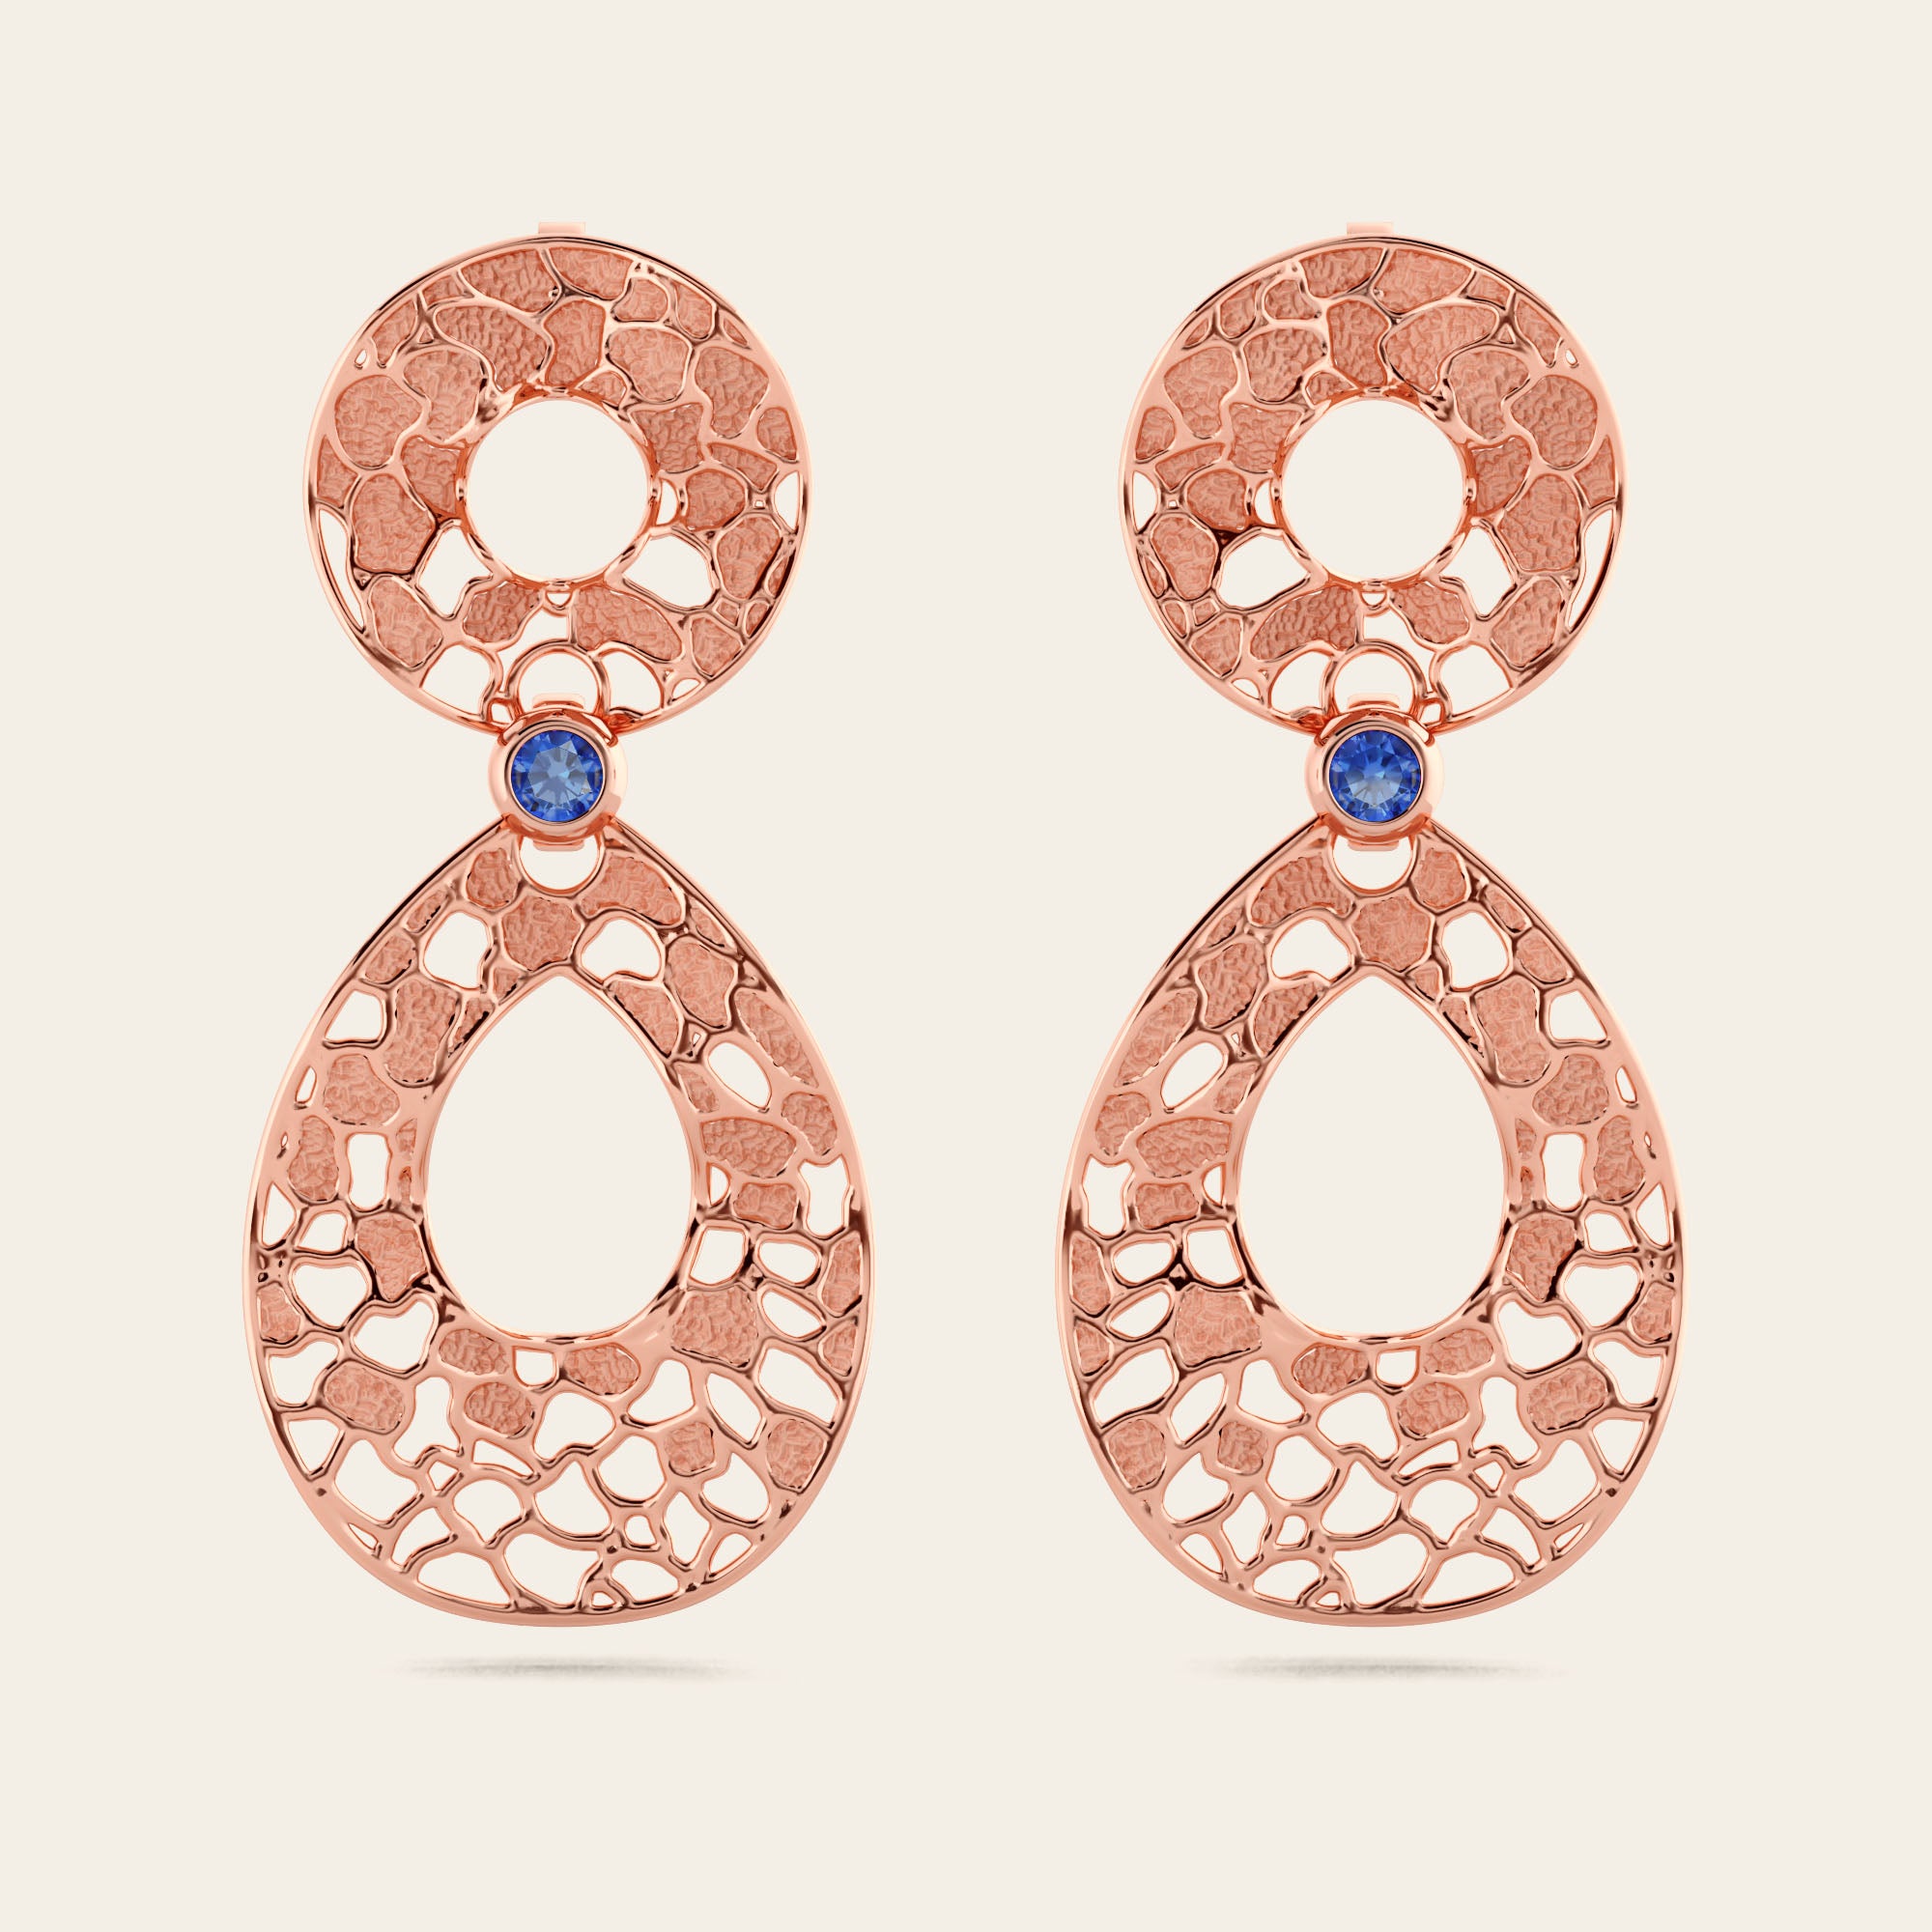 Cracked Earth Dangle Earrings with Blue Sapphires in 18k Rose Gold